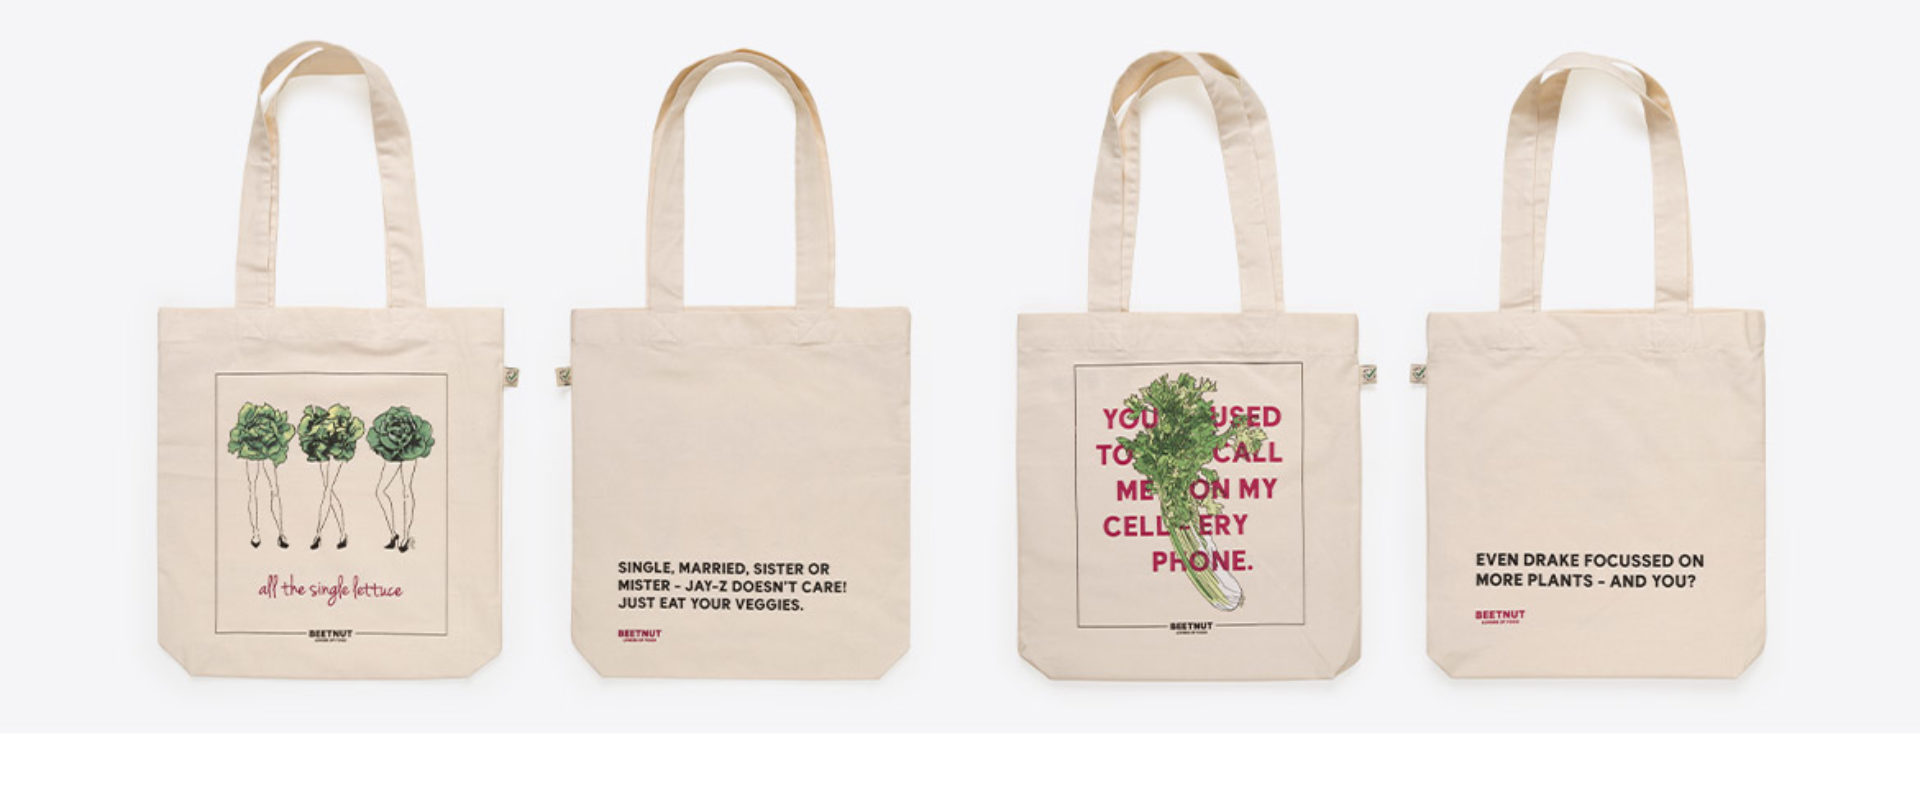 Beetnut Shopping Bags Mit Sujets